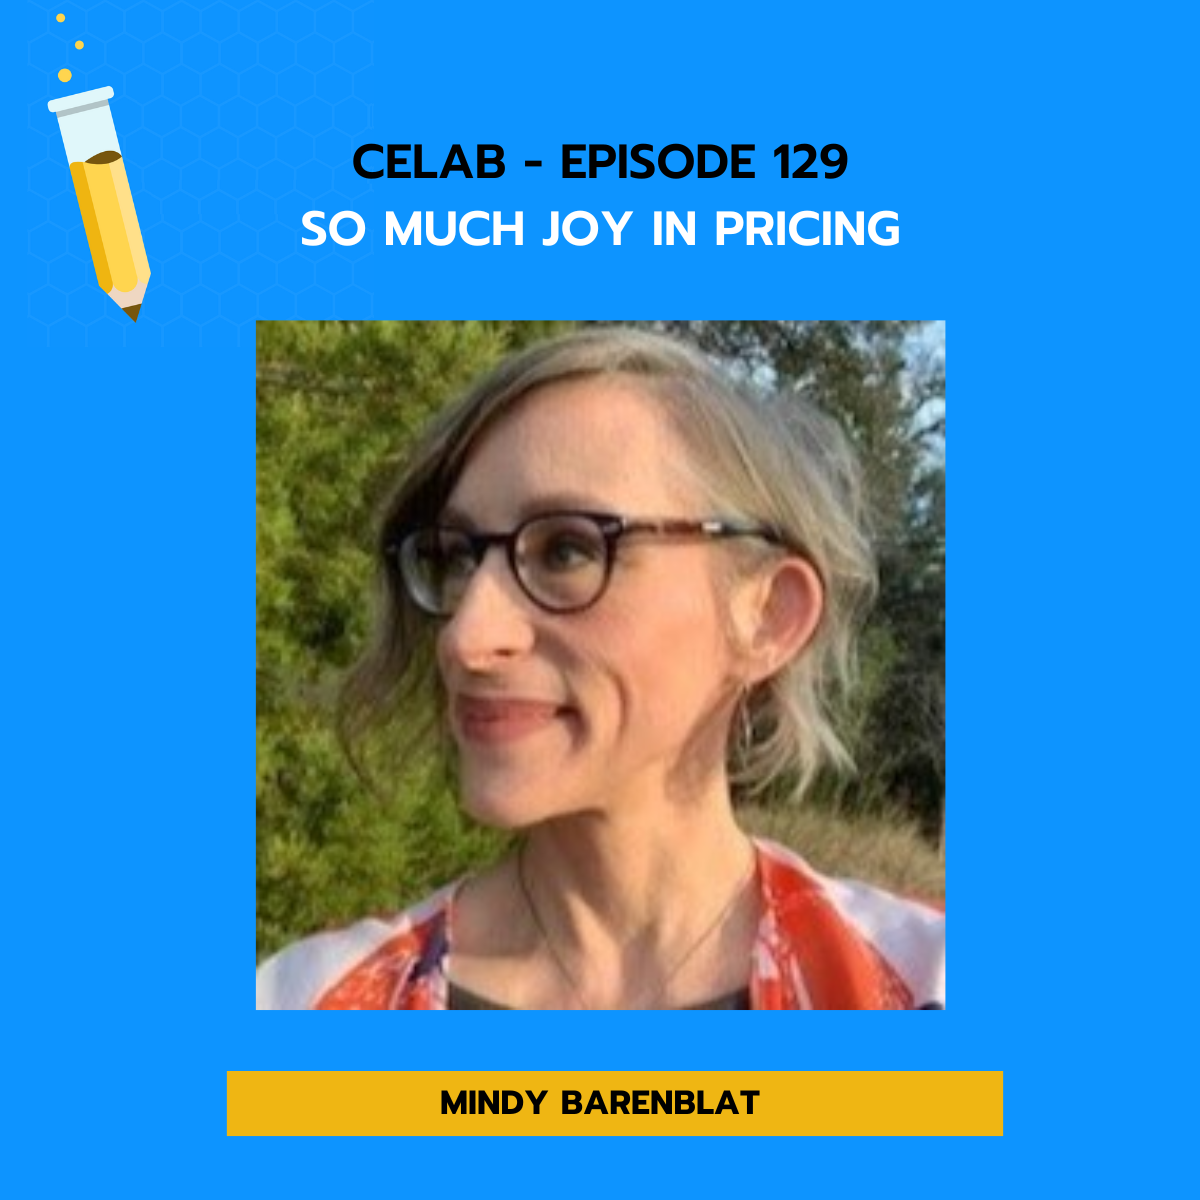 Episode 129 - Mindy Barenblat - So Much Joy in Pricing